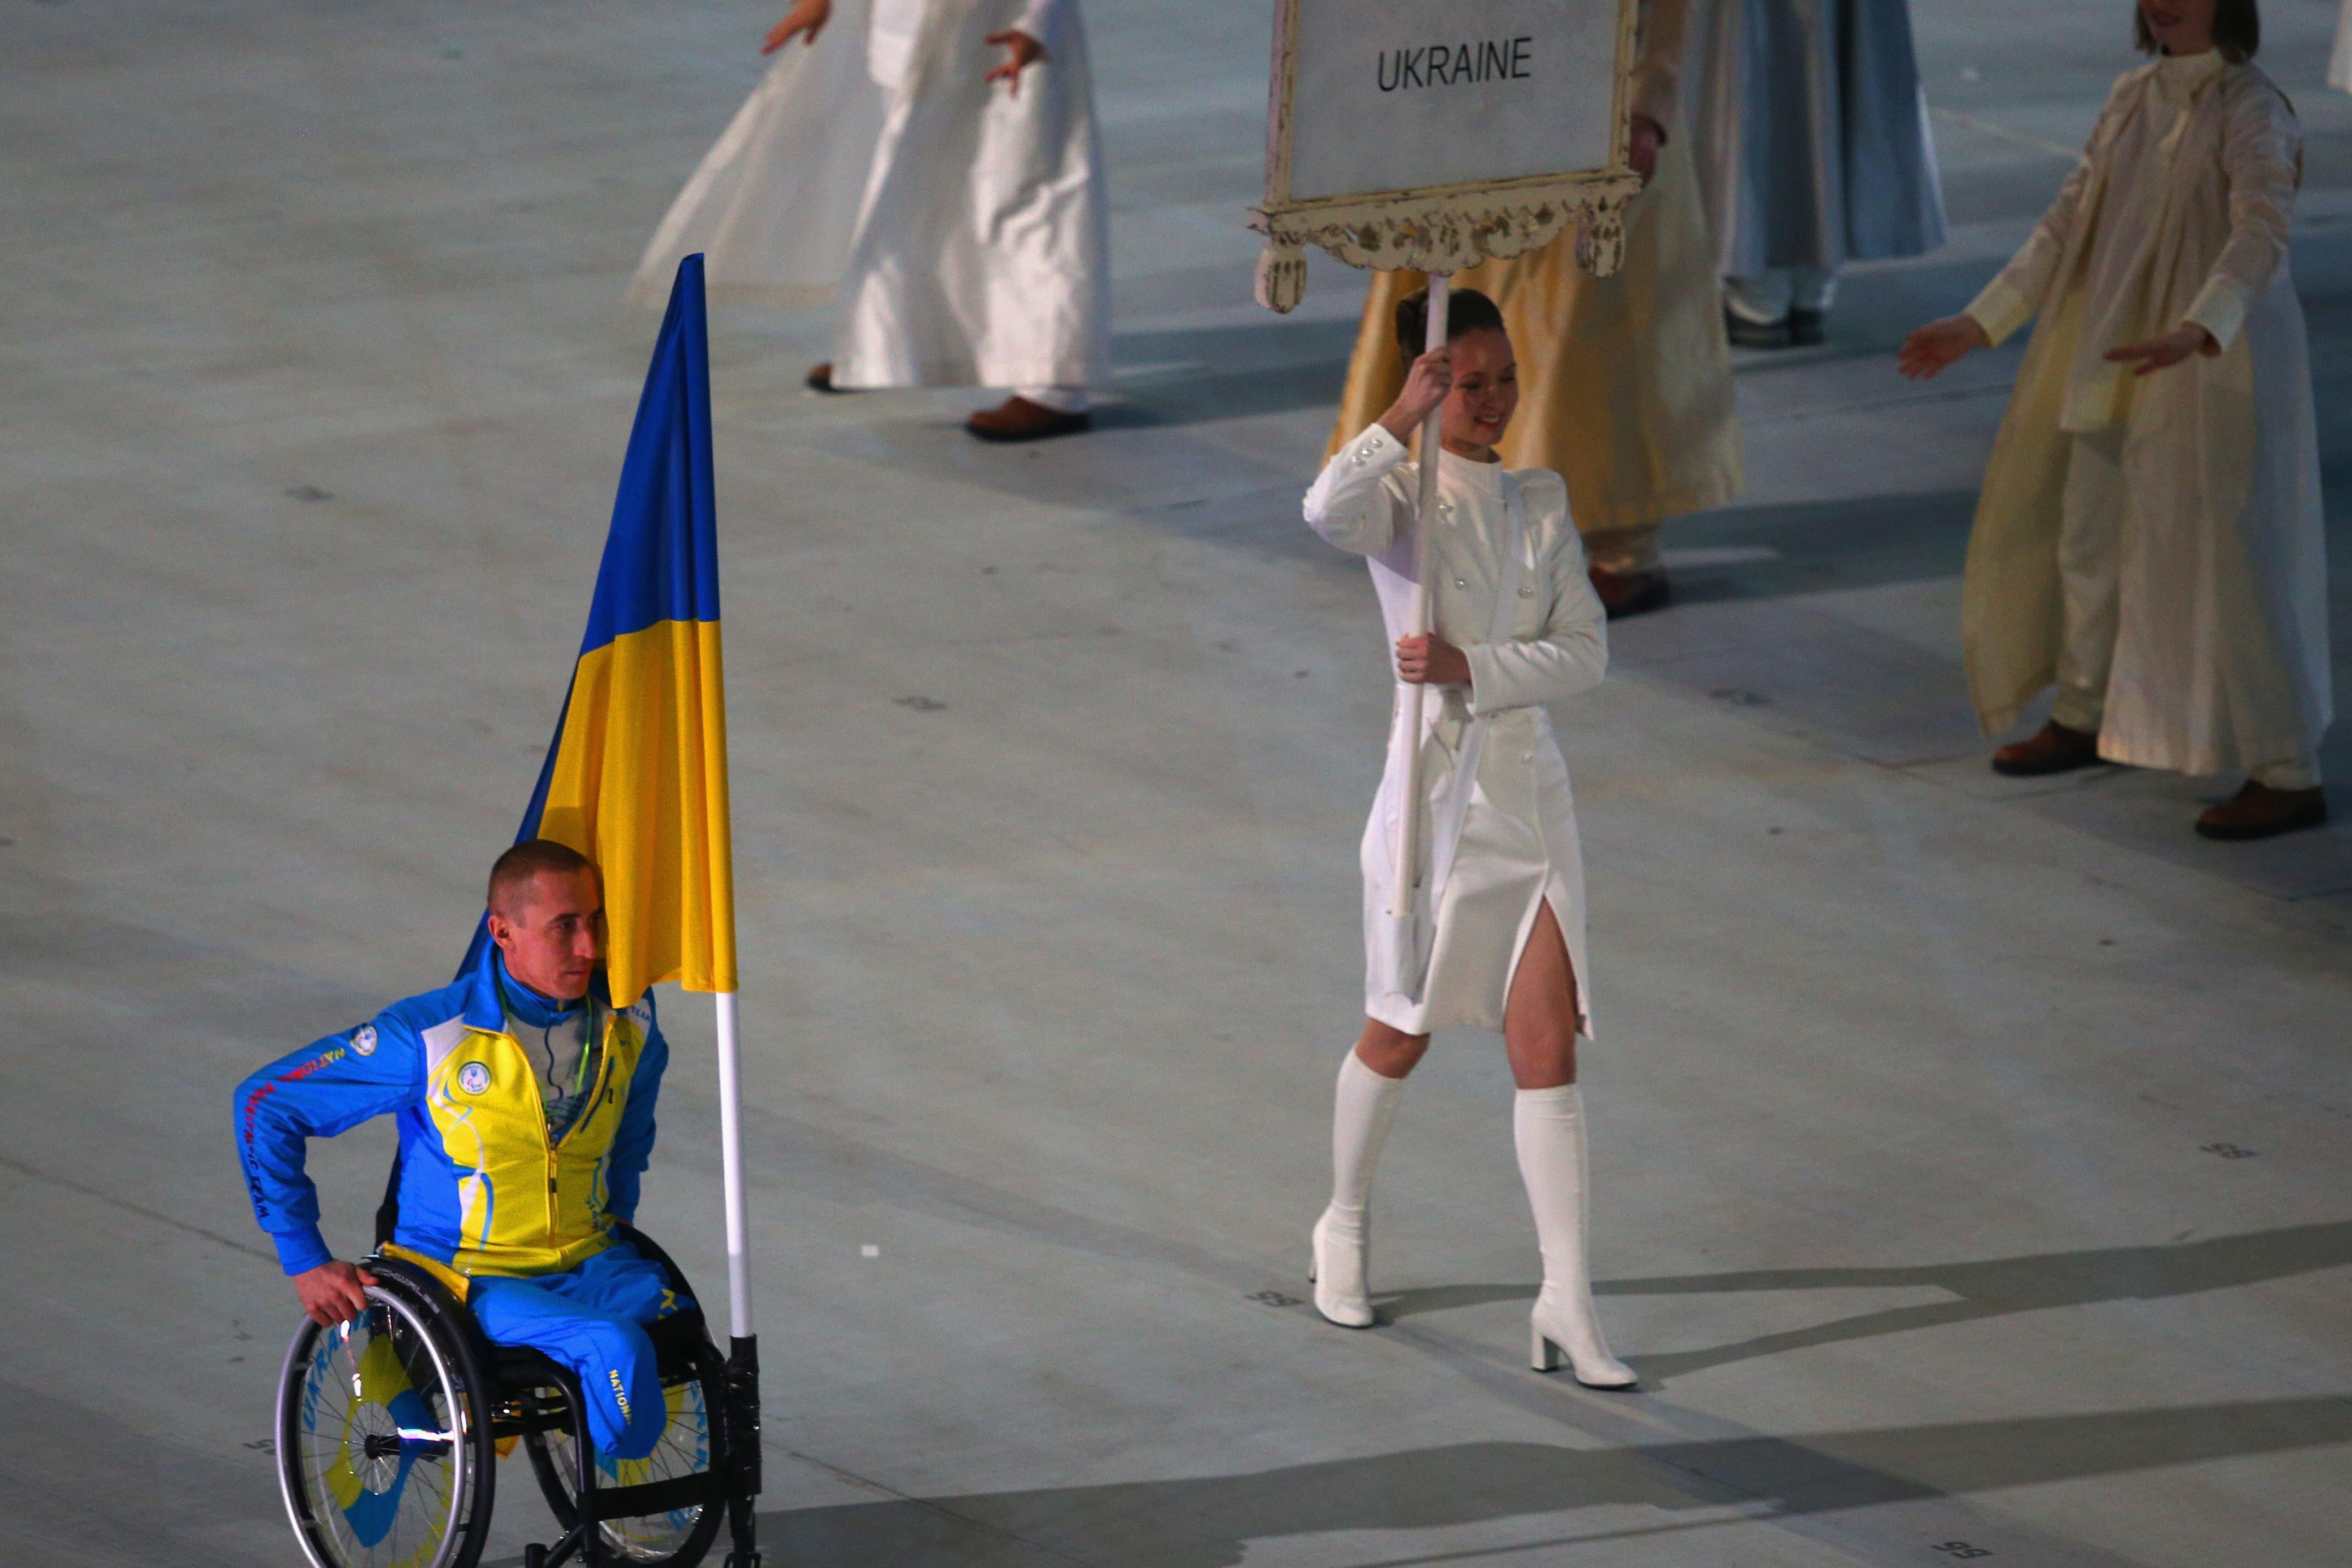 Mykailo Tkachenko of Ukraine bears the flag during the opening ceremony of the Sochi 2014 Paralympic Winter Games at Fisht Olympic Stadium.